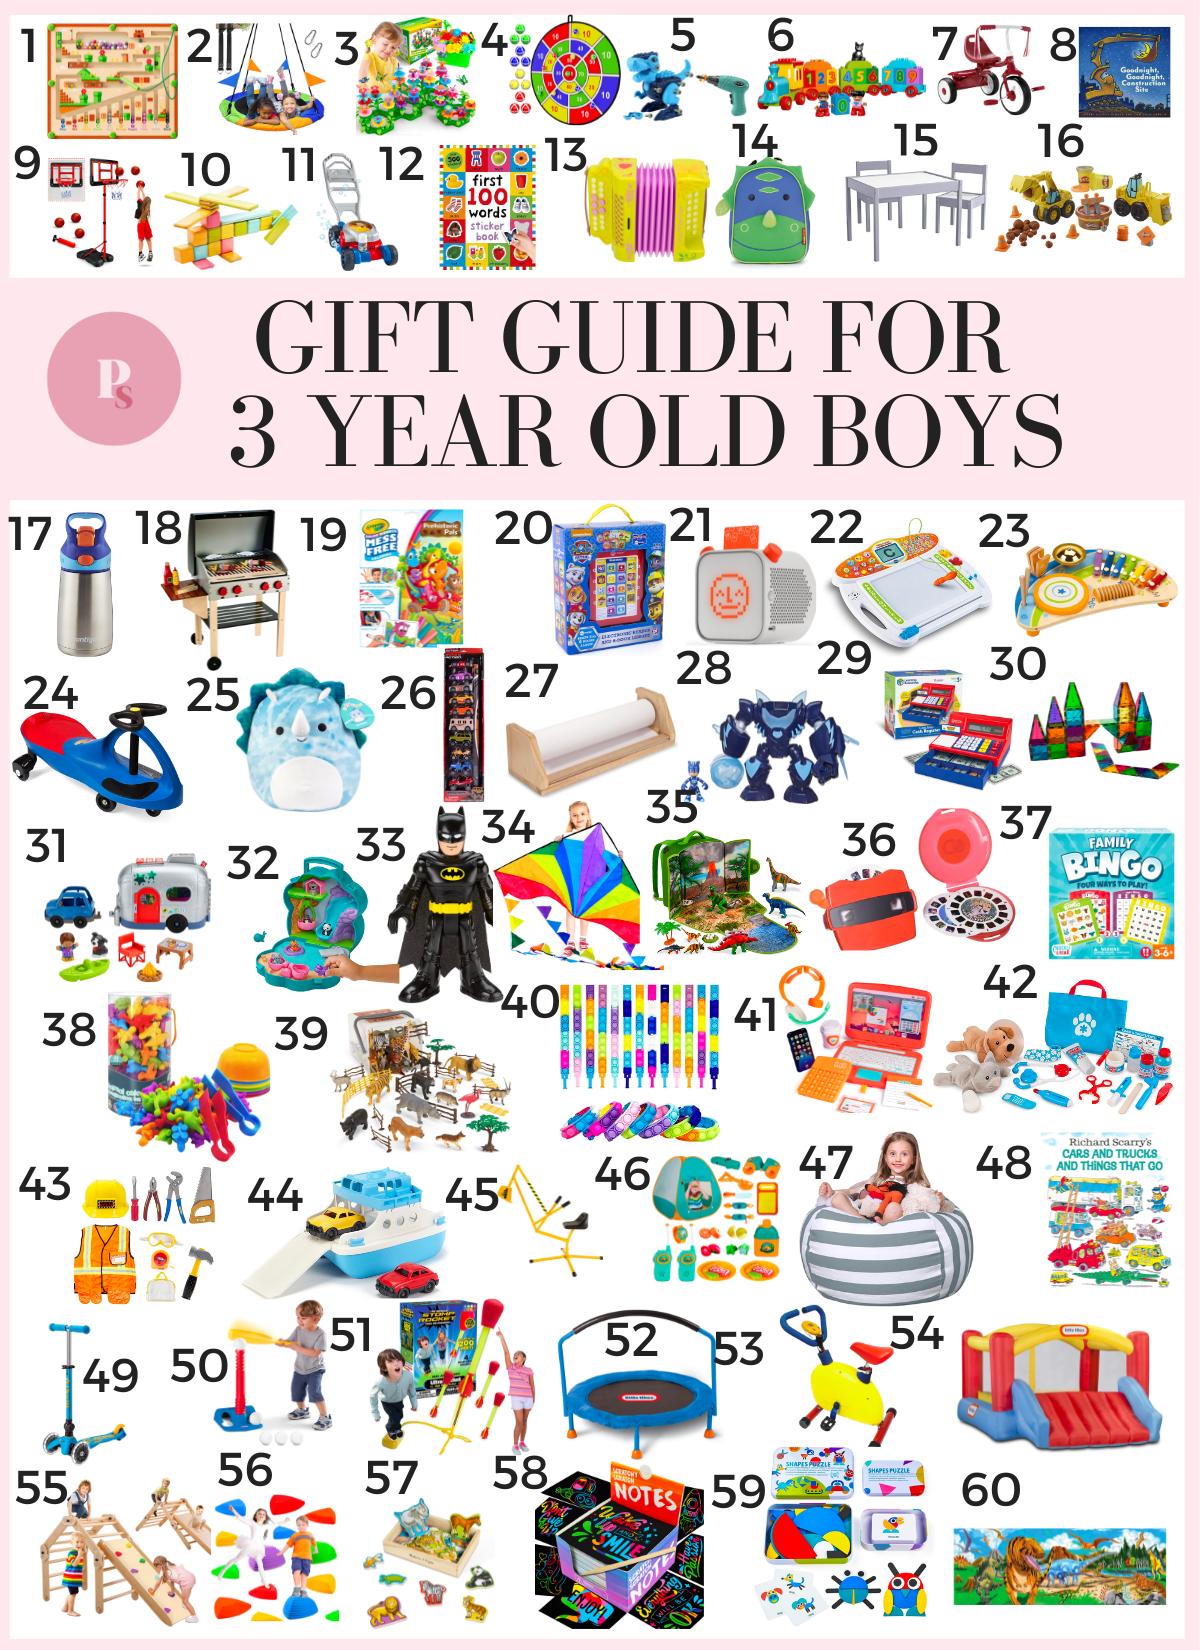 25 Best Gifts for 15 Year Old Boys: Trendy, Fun, and Memorable - GiftLab24